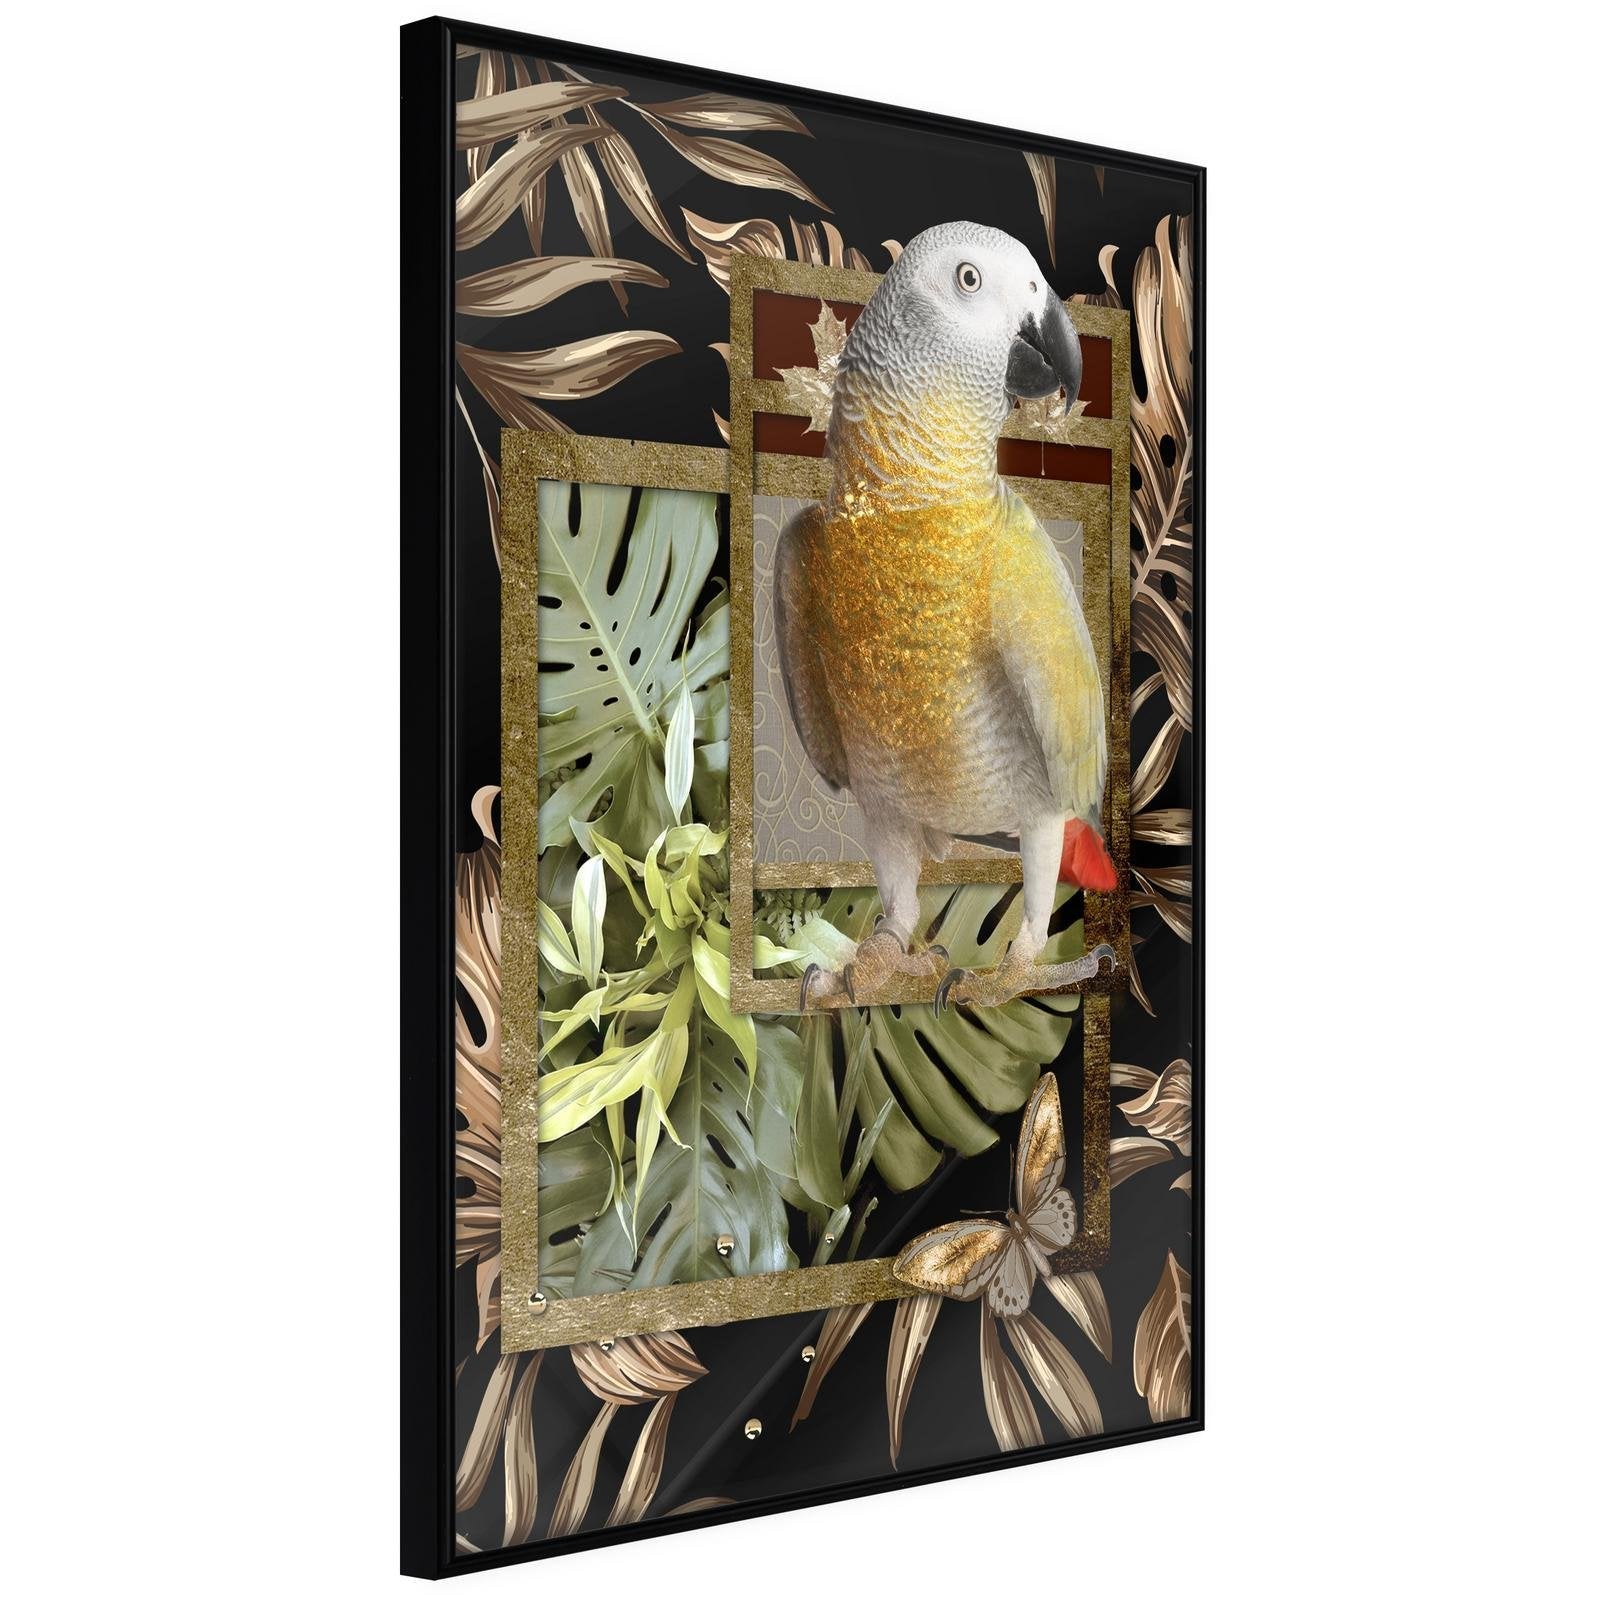 Inramad Poster / Tavla - Composition with Gold Parrot-Poster Inramad-Artgeist-20x30-Svart ram-peaceofhome.se